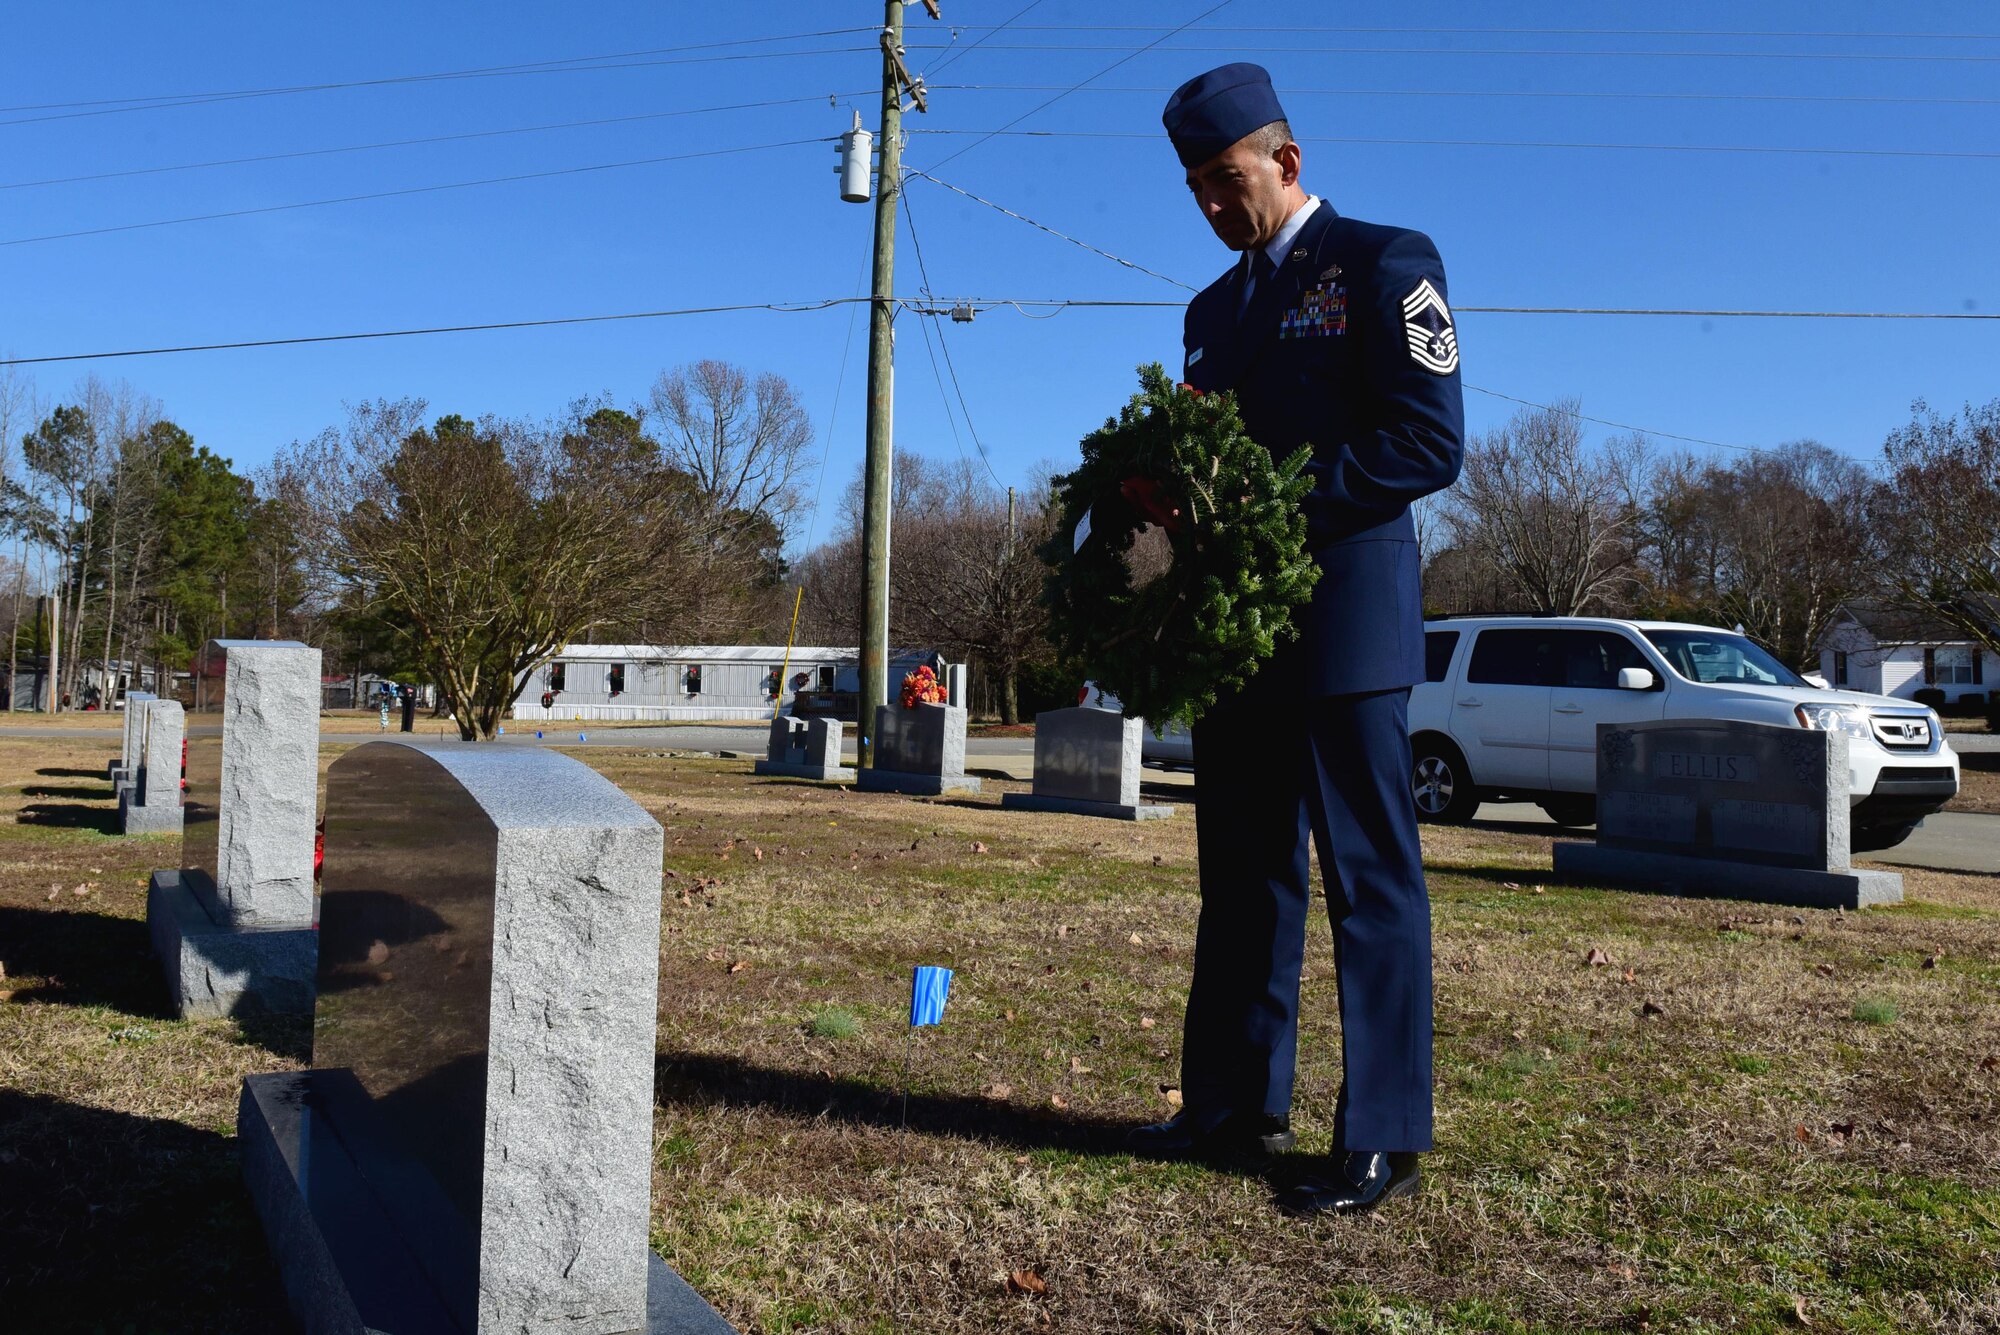 Chief Master Sgt. Marlon Carcamo, 4th Mission Support Group superintendent, lays a wreath on the grave of a fallen service member during the Wayne County Wreaths Across America ceremony Dec. 16, 2017, at Evergreen Memorial Cemetery in Princeton, North Carolina.